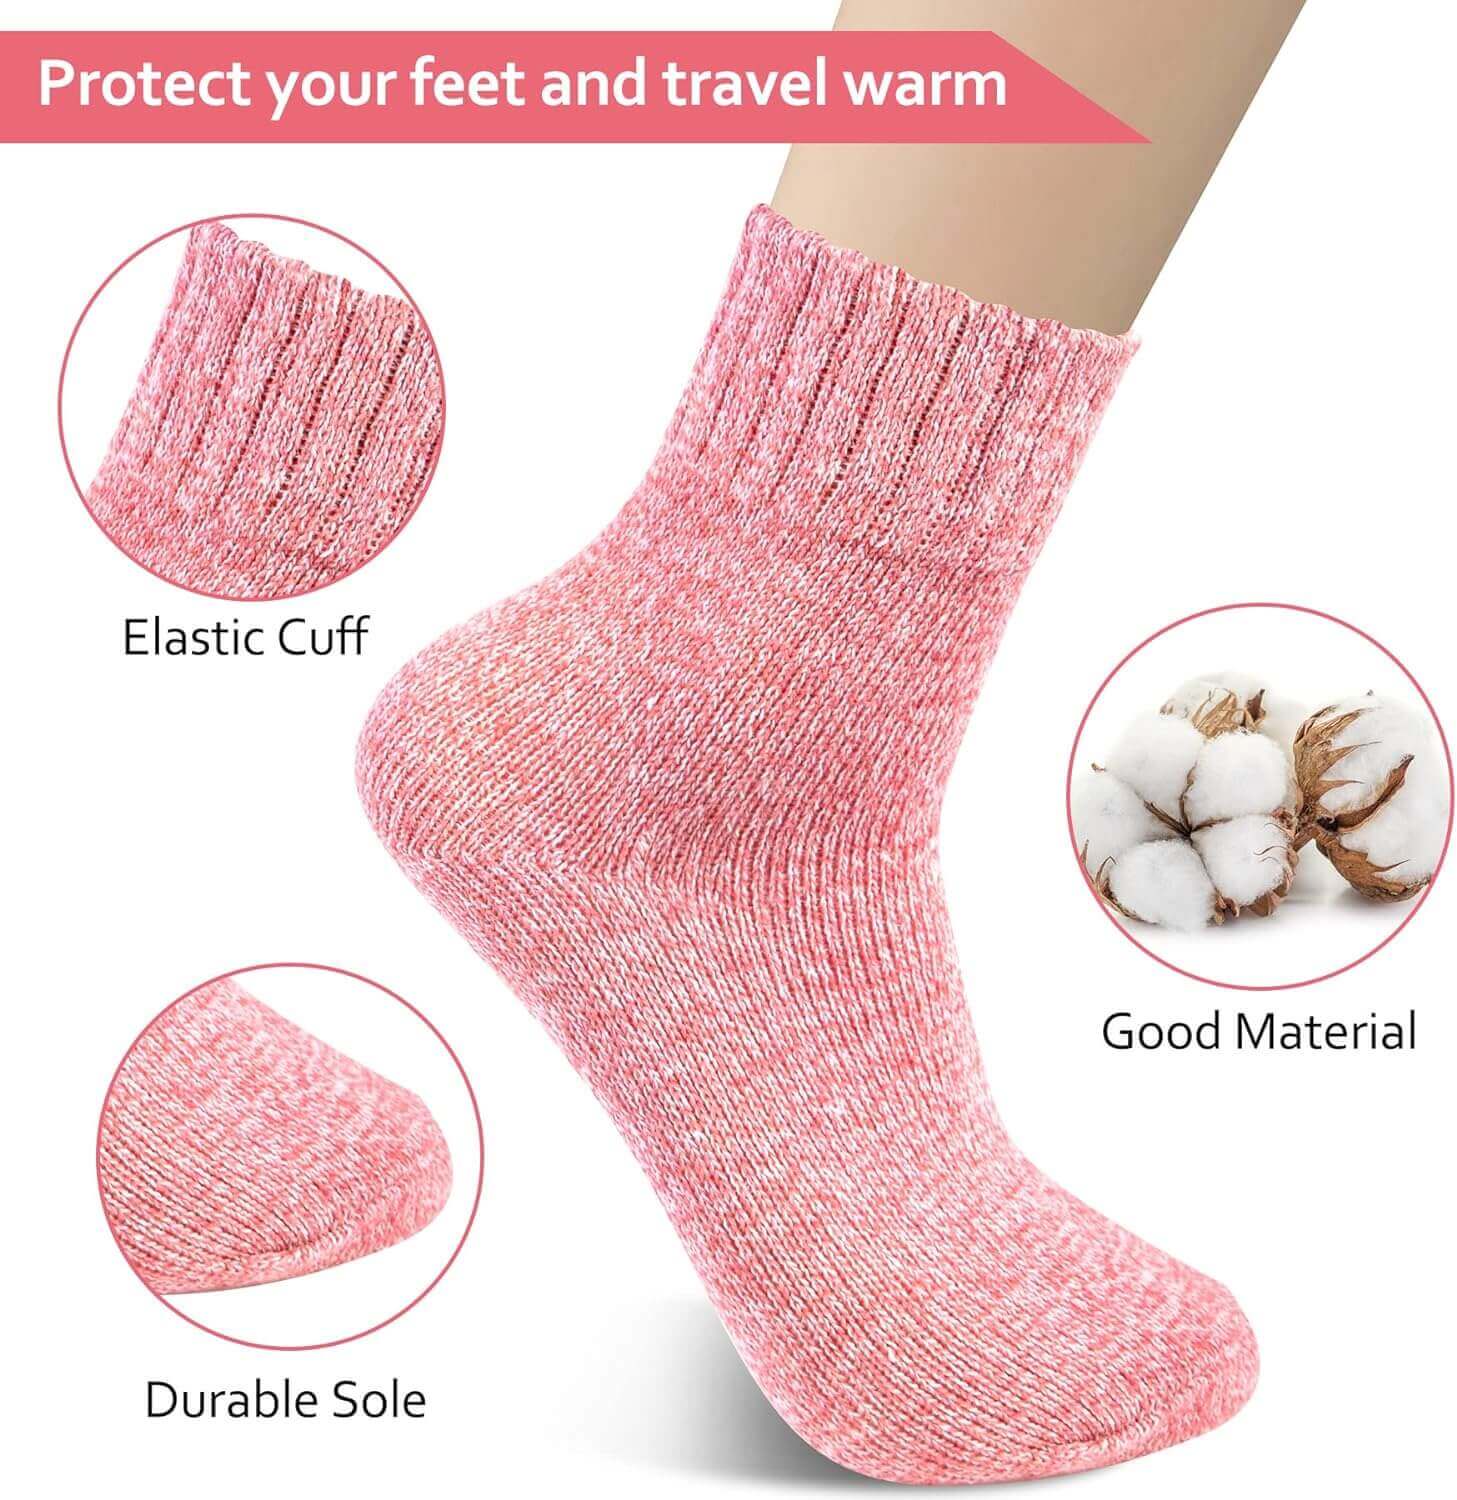 Shop The Latest >5 Pack Women's Thick Knit Wool Socks Winter Warm Socks > *Only $21.59*> From The Top Brand > *Senker Fashionl* > Shop Now and Get Free Shipping On Orders Over $45.00 >*Shop Earth Foot*